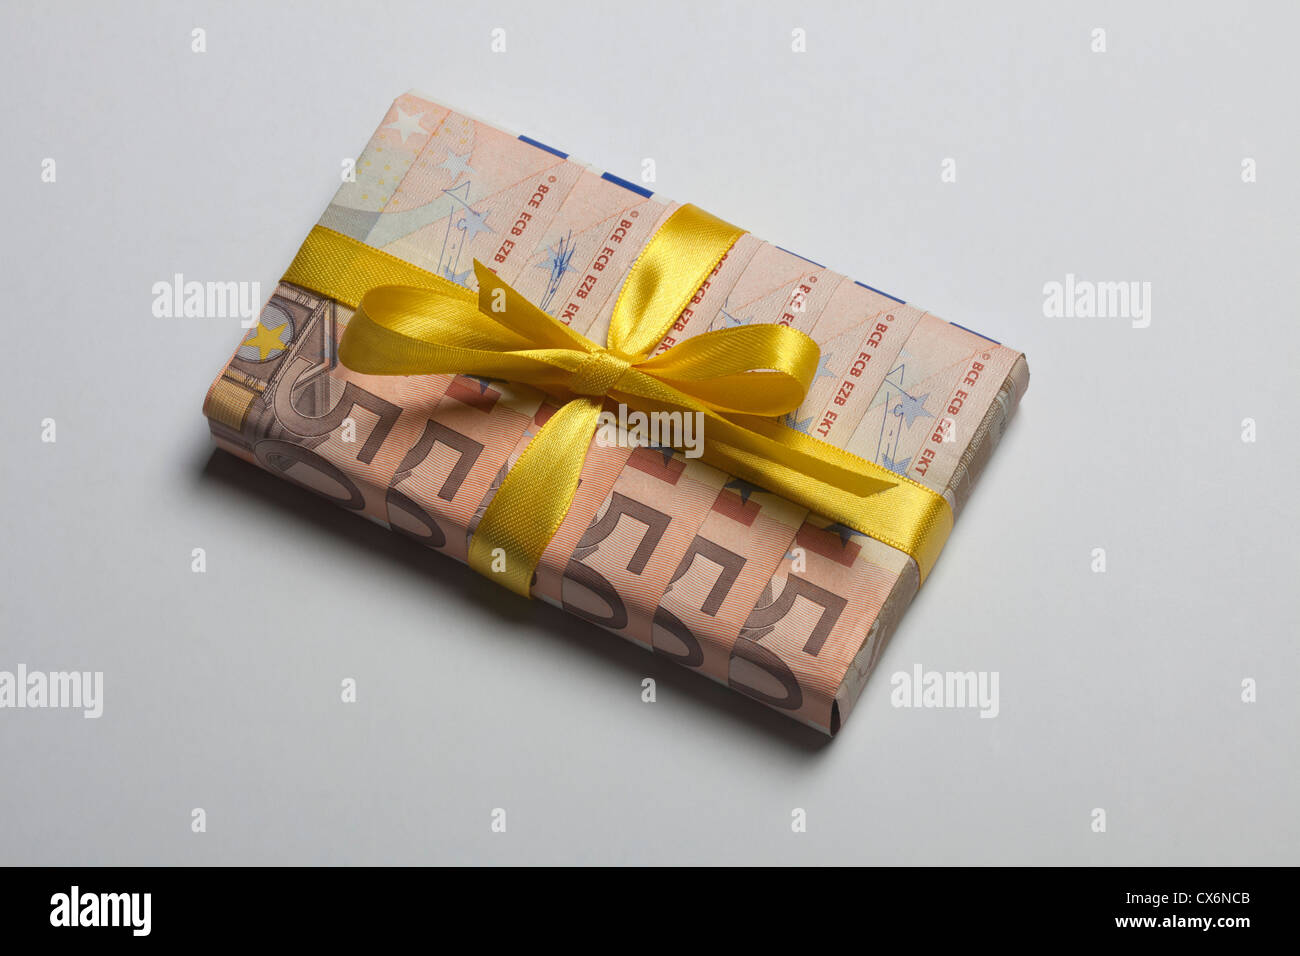 Fifty Euro banknotes used to wrap a gift with a yellow bow Stock Photo